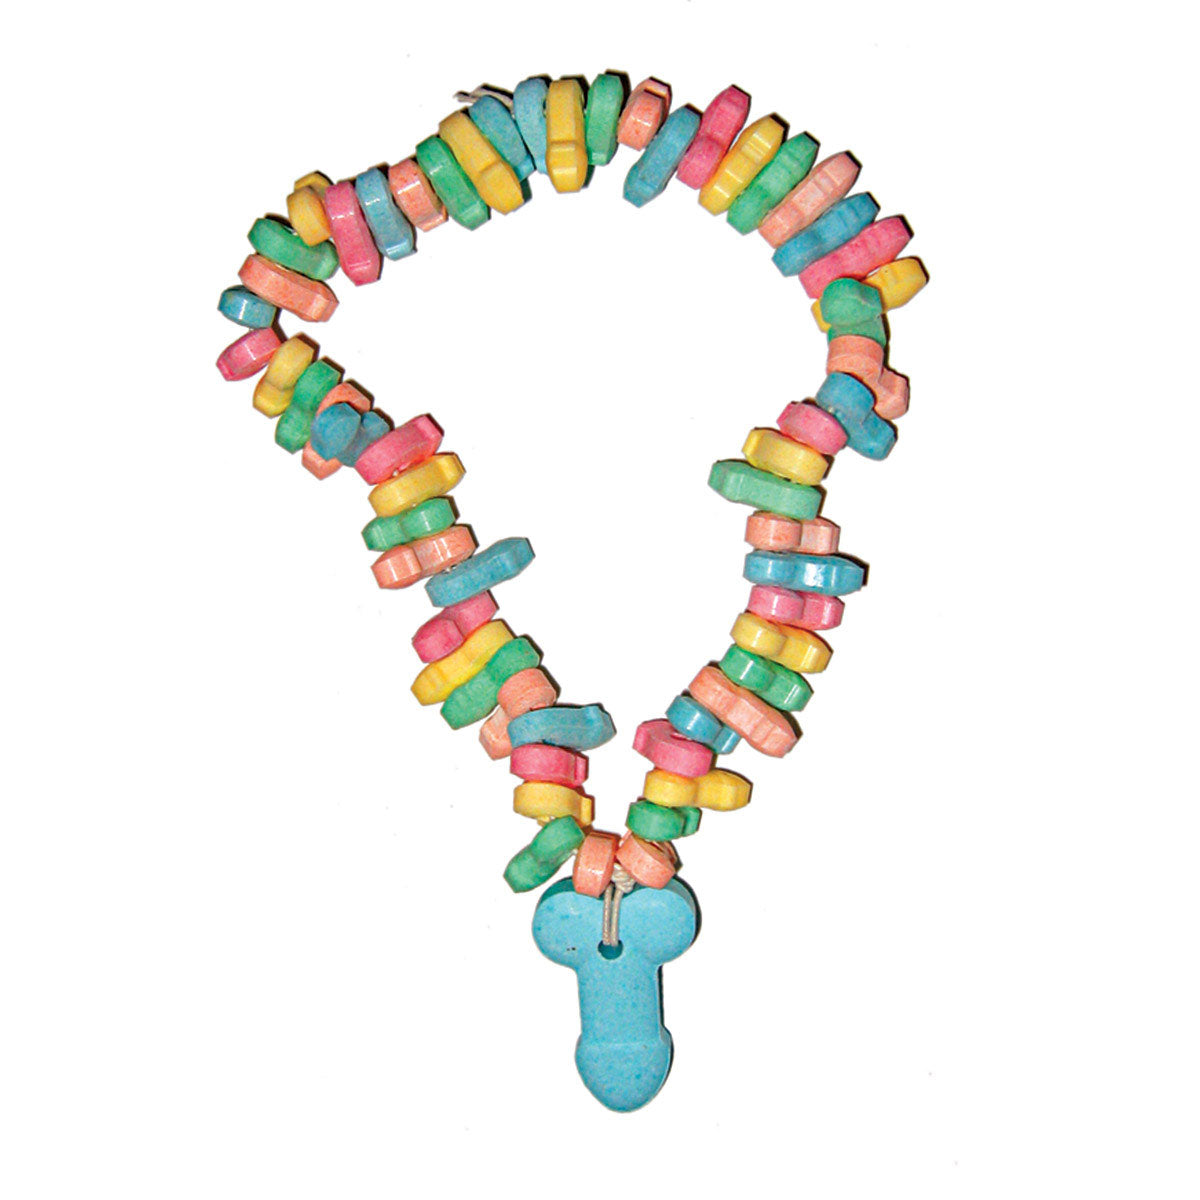 Super Fun Penis Candy Necklace 24pc Display